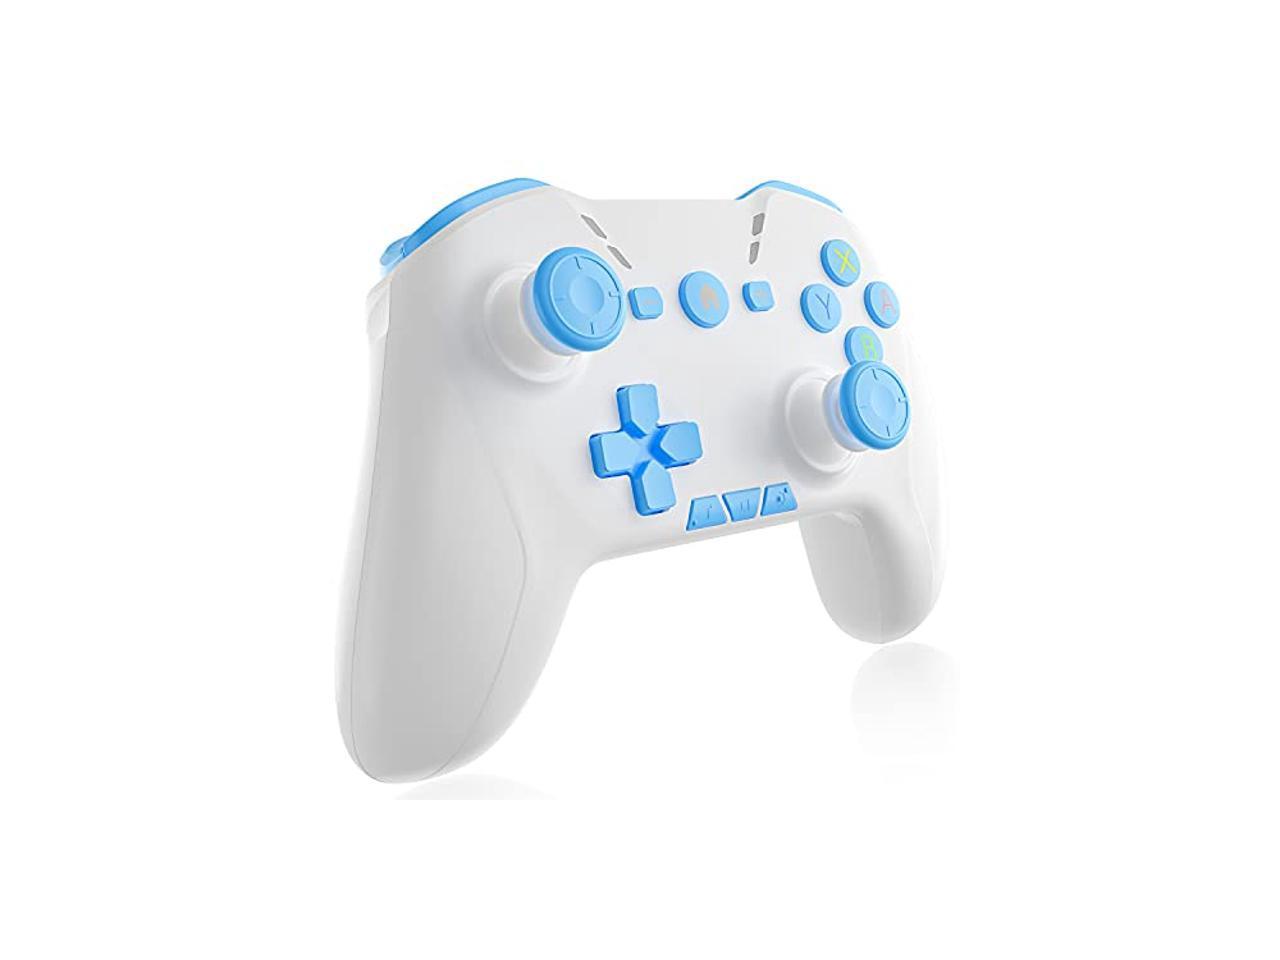 Bluetooth Controller Compatible With Windows 7 8 10 Pc Ios Android Switch Steam Oled Game Console Dual Shock Wireless Pro Controller Remote Gamepad Joystick With 650mah Battery White Blue Newegg Com